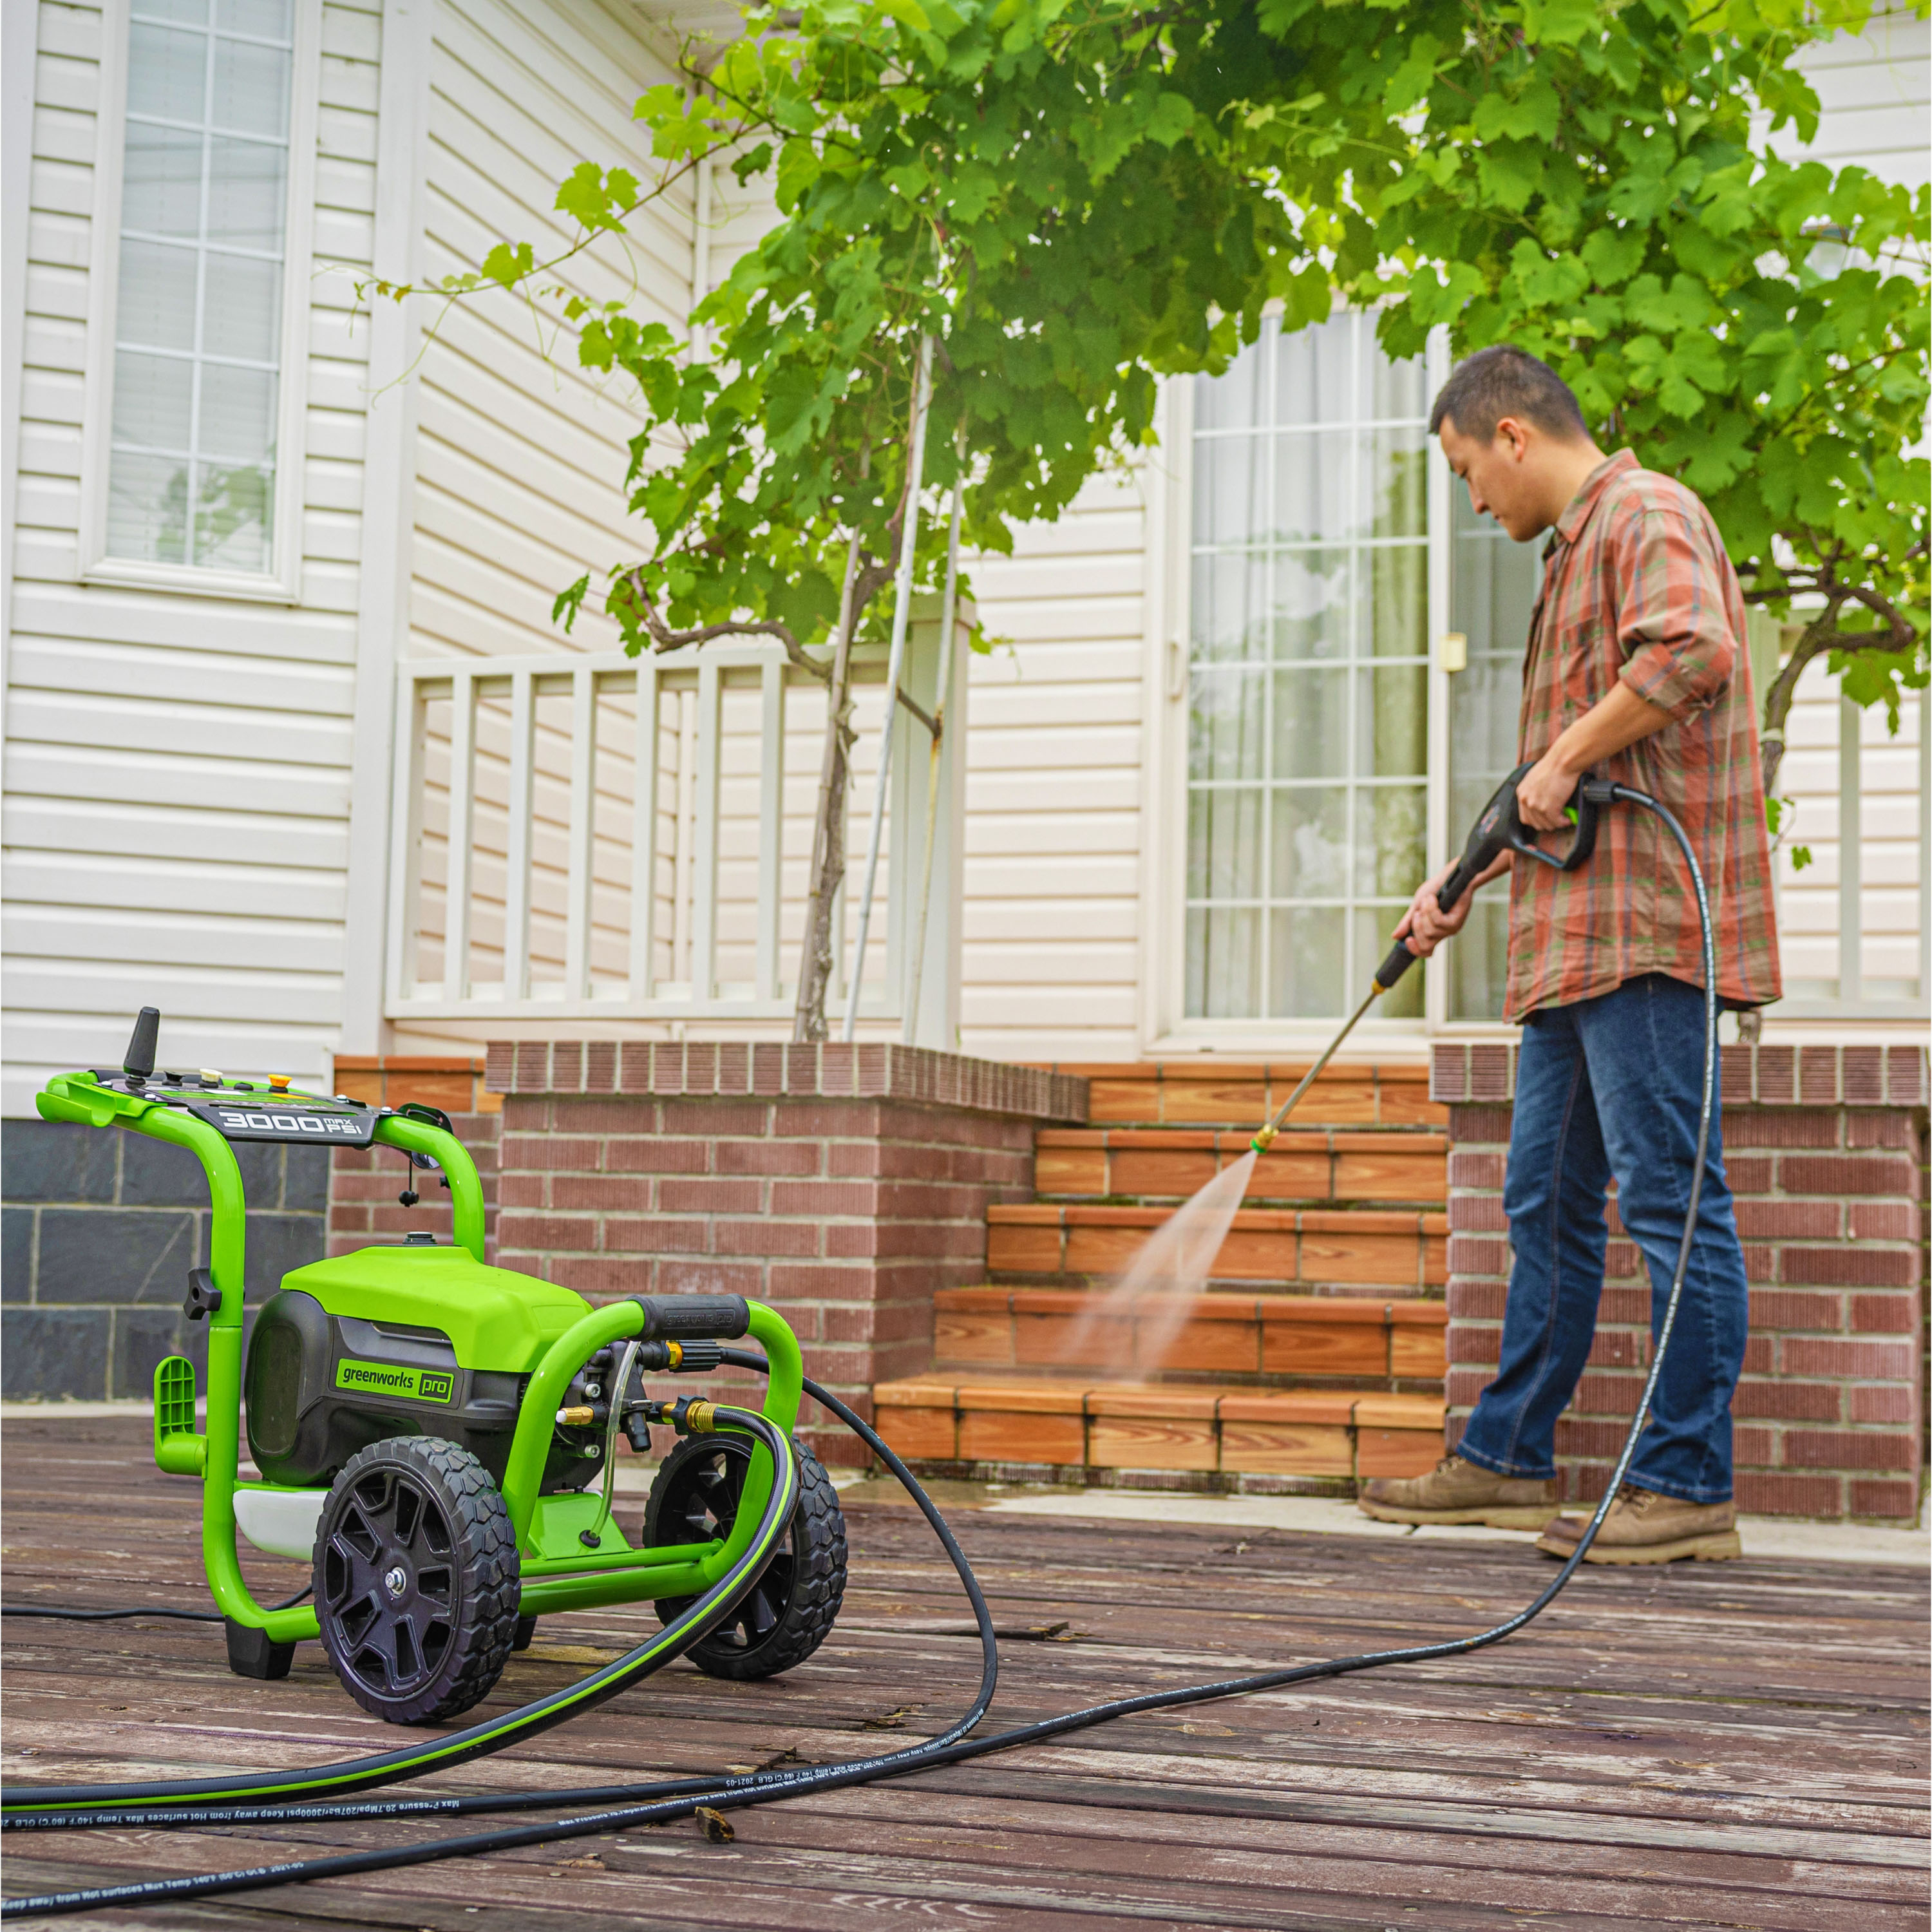 Left View: Greenworks - Electric Pressure Washer up to 3000 PSI at 2.0 GPM Combo Kit with short gun, mitts, and 15" surface cleaner - Green